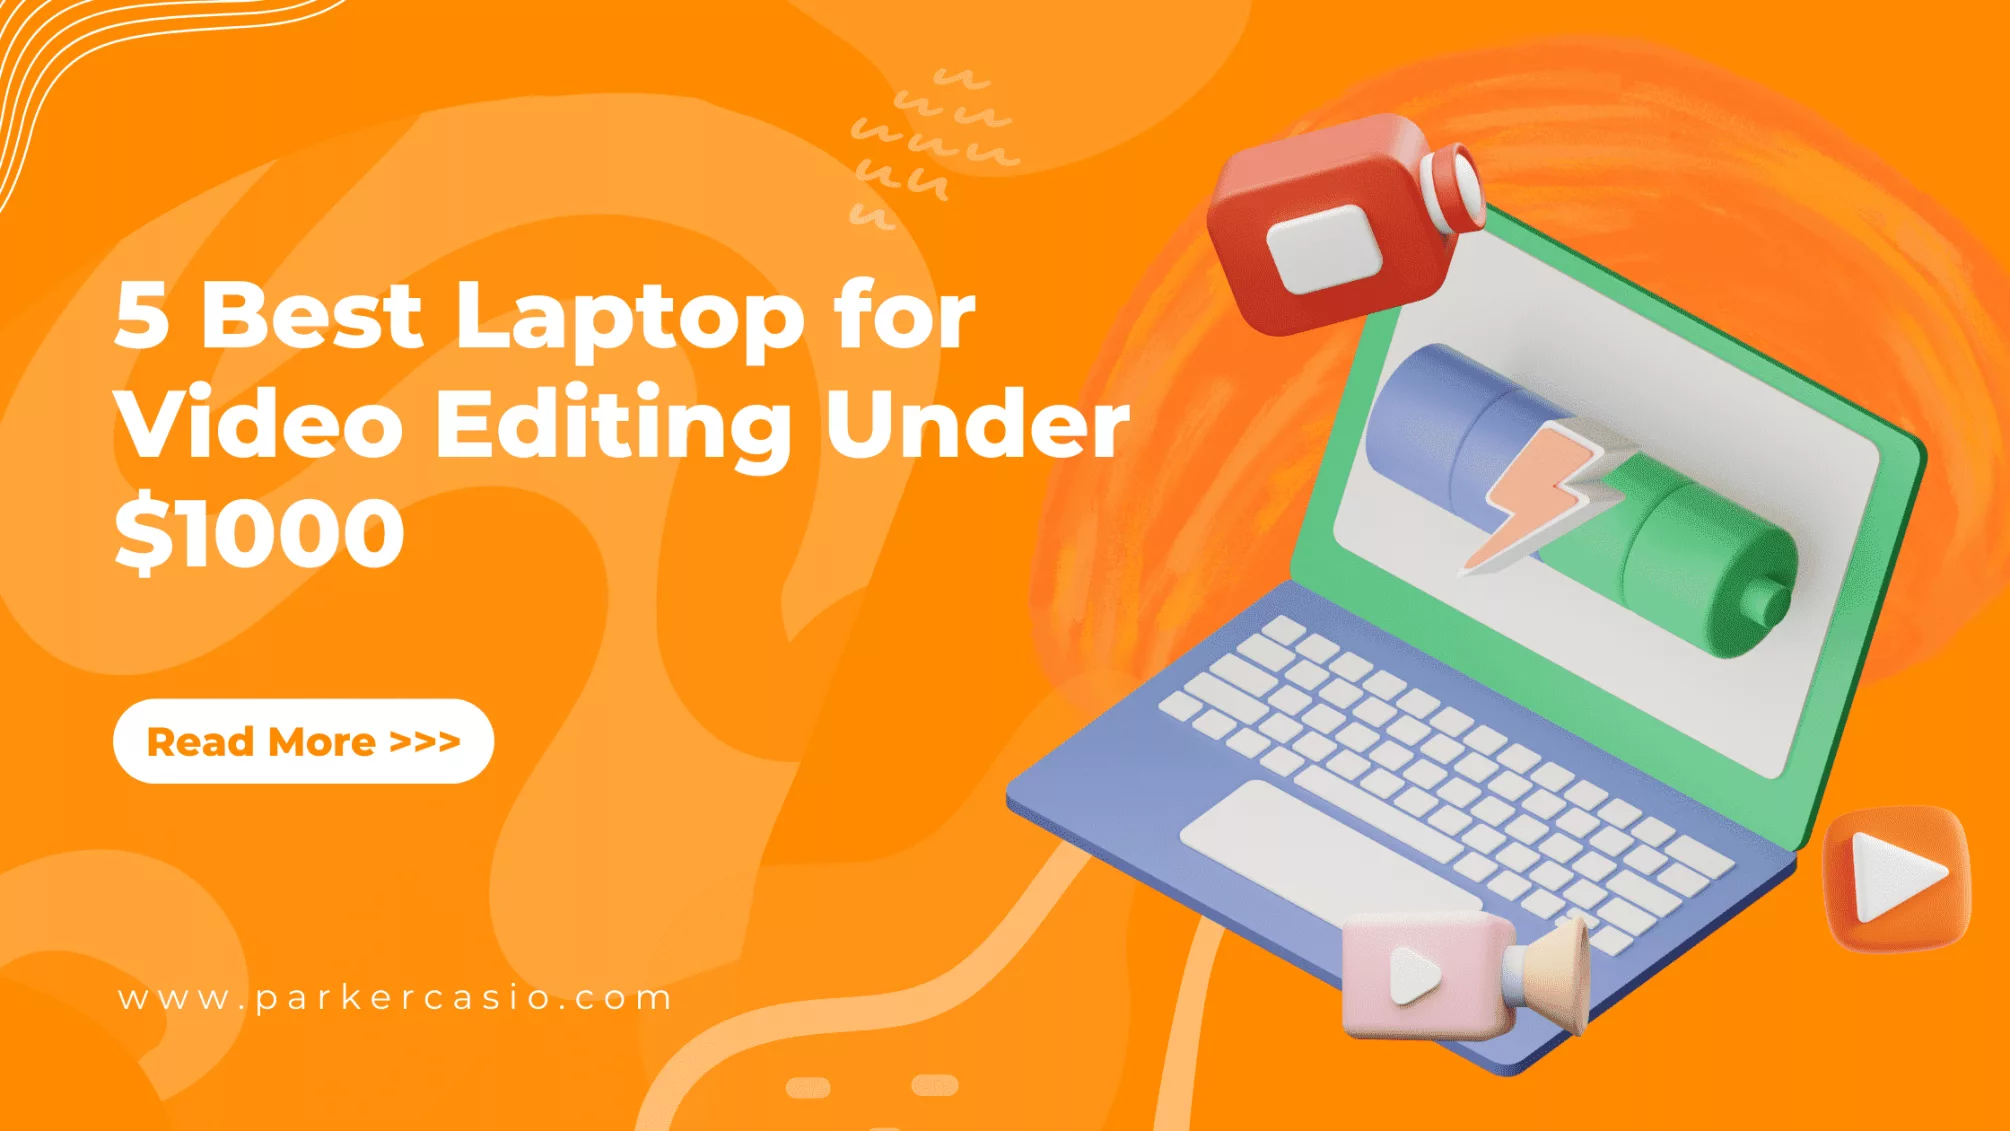 5 Best Laptop for Video Editing Under $1000